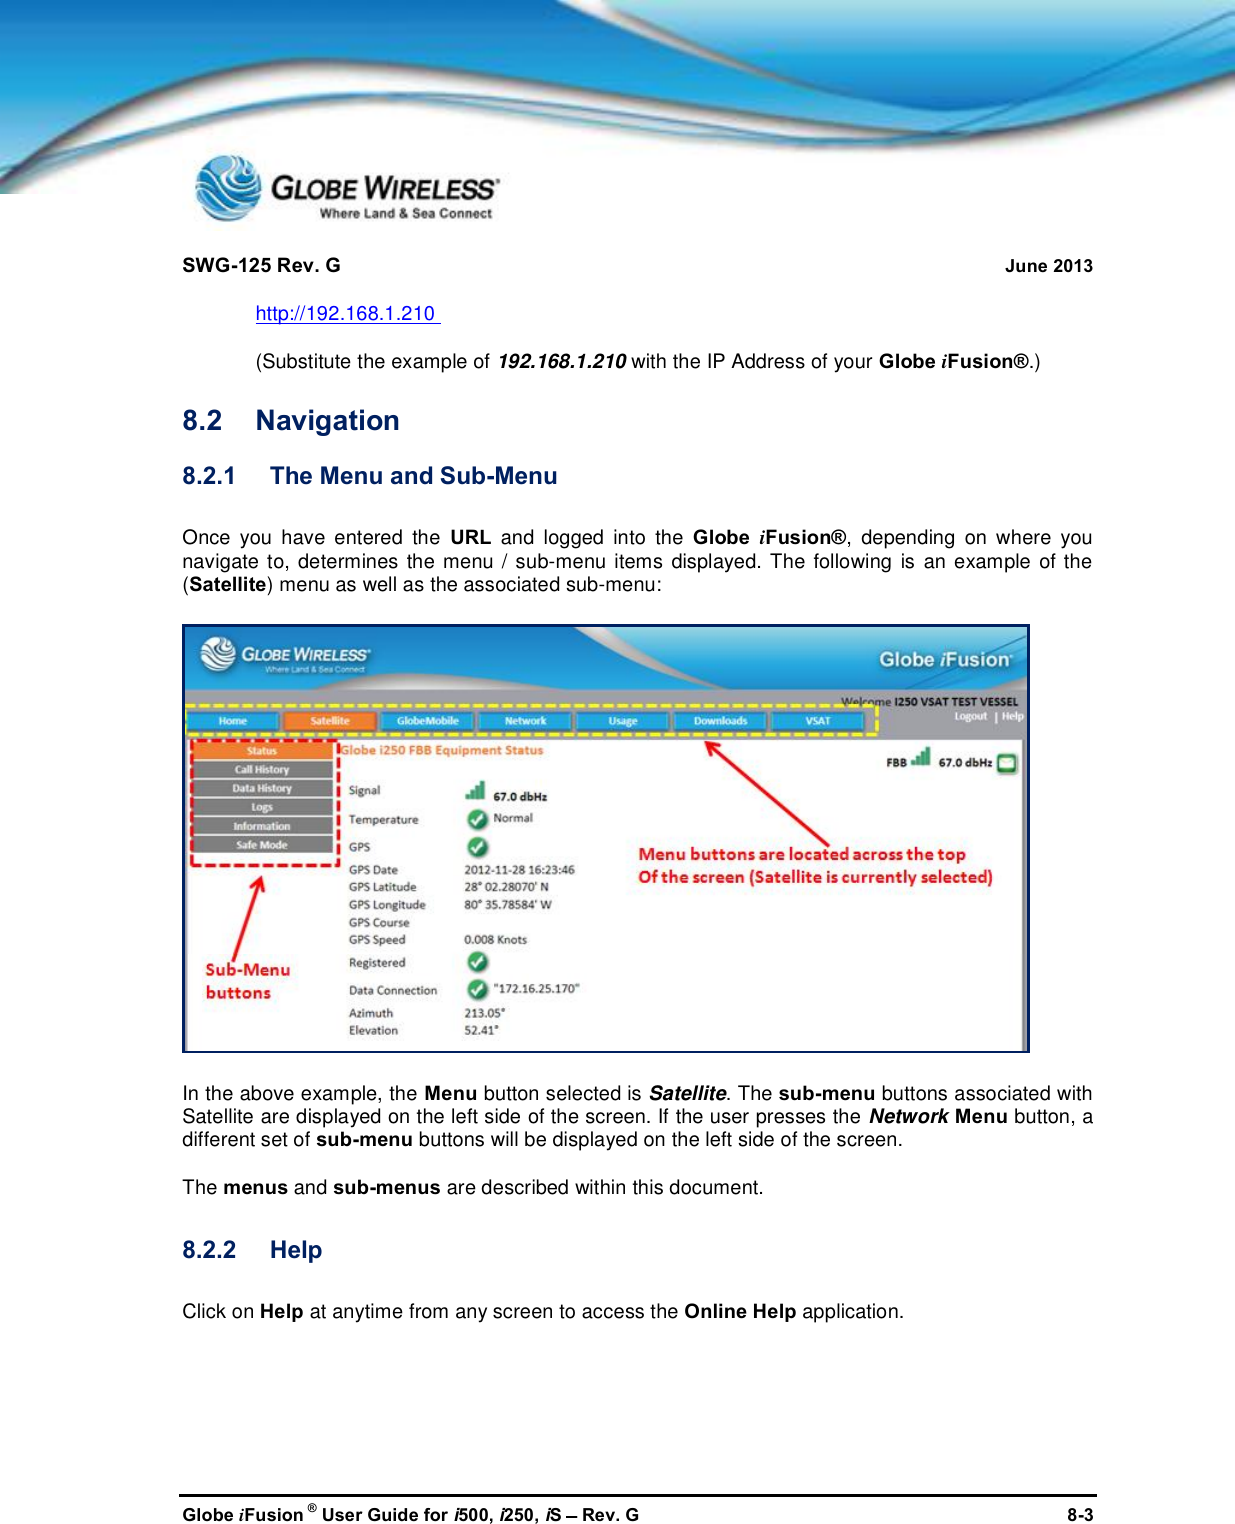 SWG-125 Rev. G June 2013Globe iFusion ®User Guide for i500, i250, iSRev. G 8-3http://192.168.1.210(Substitute the example of 192.168.1.210 with the IP Address of your Globe iFusion®.)8.2 Navigation8.2.1 The Menu and Sub-MenuOnce you have entered the URL and logged into the Globe iFusion®, depending on where younavigate to, determines the menu / sub-menu items displayed. The following is an example of the(Satellite) menu as well as the associated sub-menu:In the above example, the Menu button selected is Satellite. The sub-menu buttons associated withSatellite are displayed on the left side of the screen. If the user presses the Network Menu button, adifferent set of sub-menu buttons will be displayed on the left side of the screen.The menus and sub-menus are described within this document.8.2.2 HelpClick on Help at anytime from any screen to access the Online Help application.